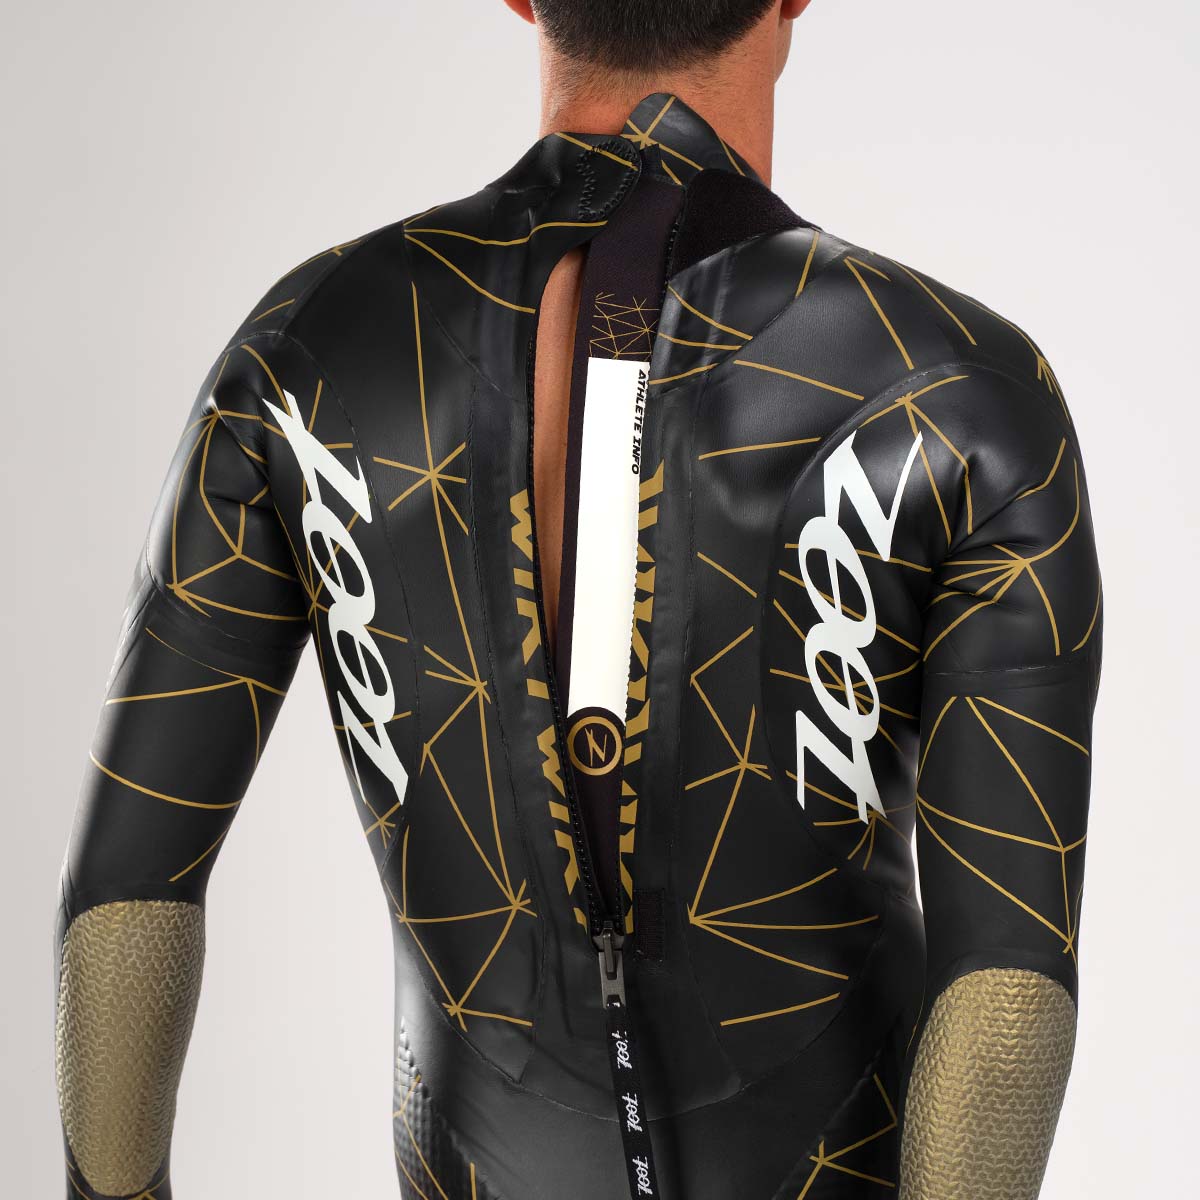 Zoot Sports WETSUITS Men's Wikiwiki 3.0 Wetsuit - Gold